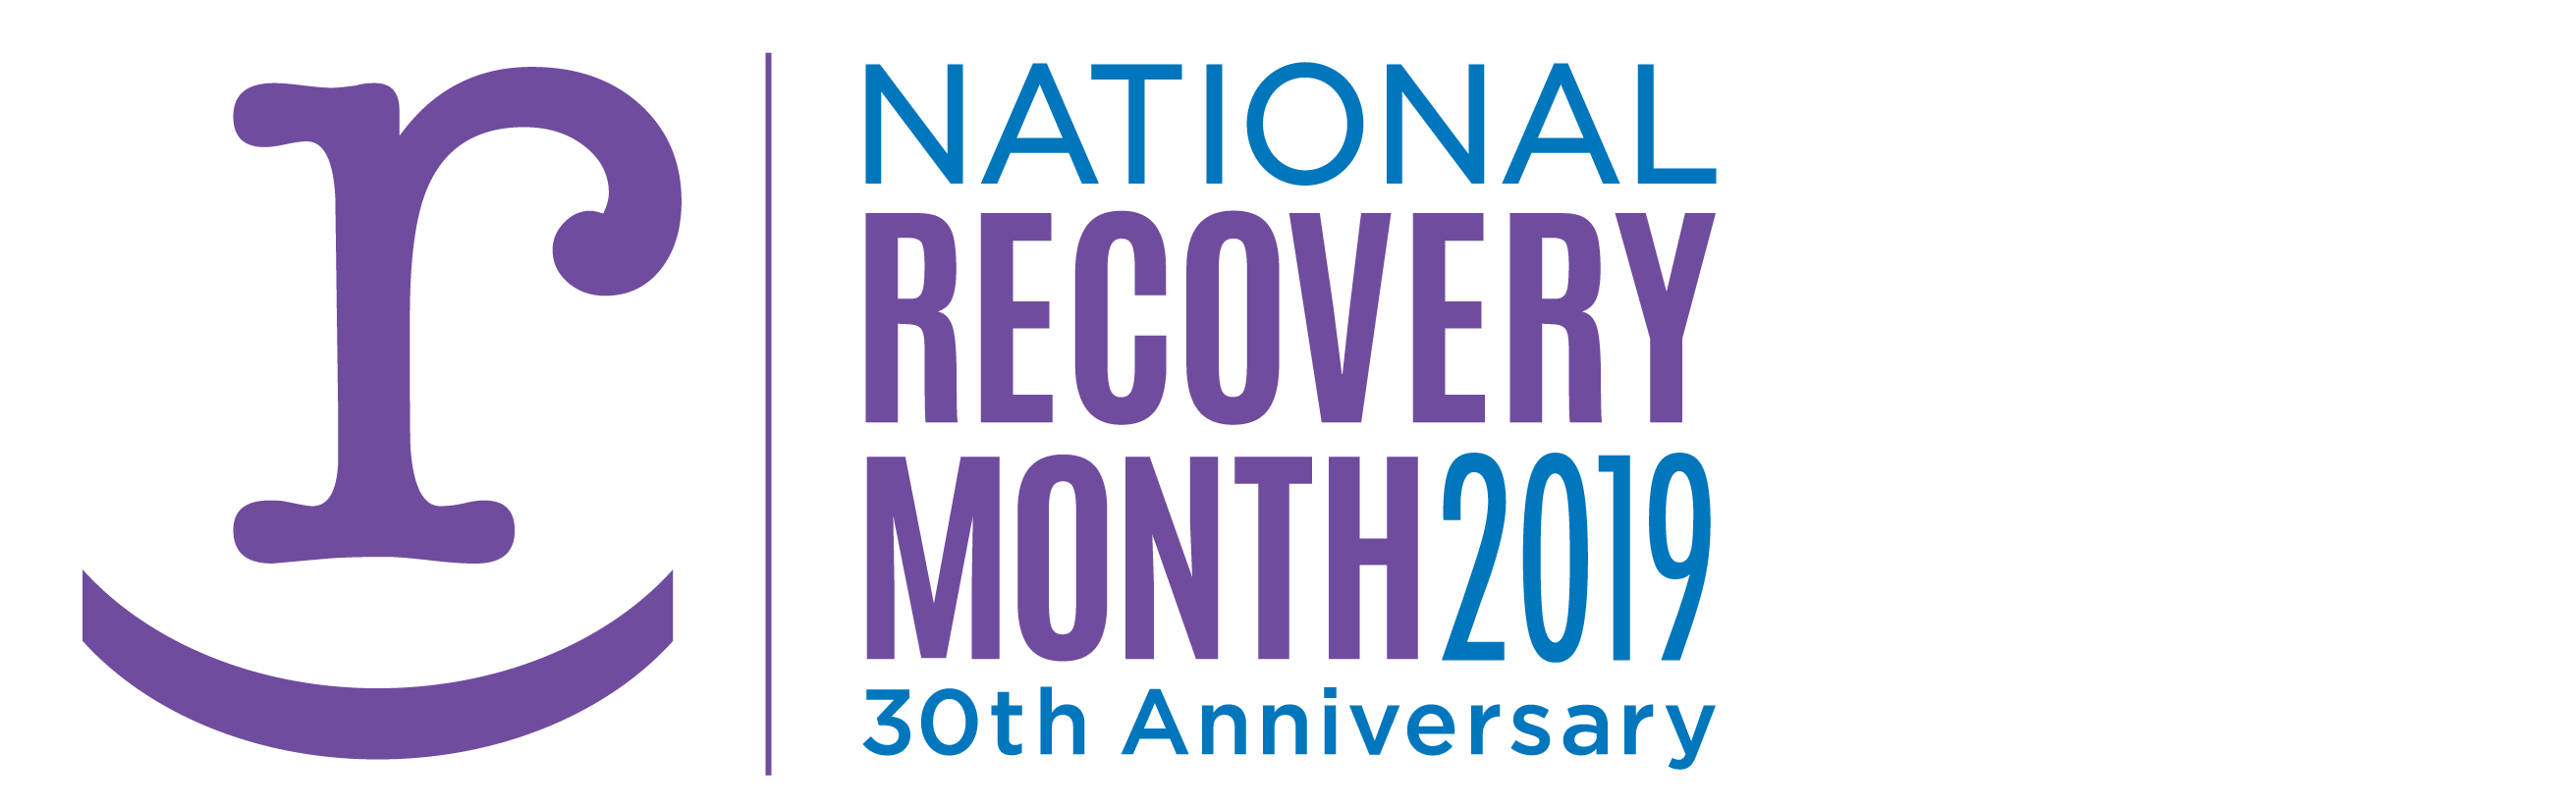 SAMHSA Logo - Recovery Month Logos and r is For Recovery Symbols